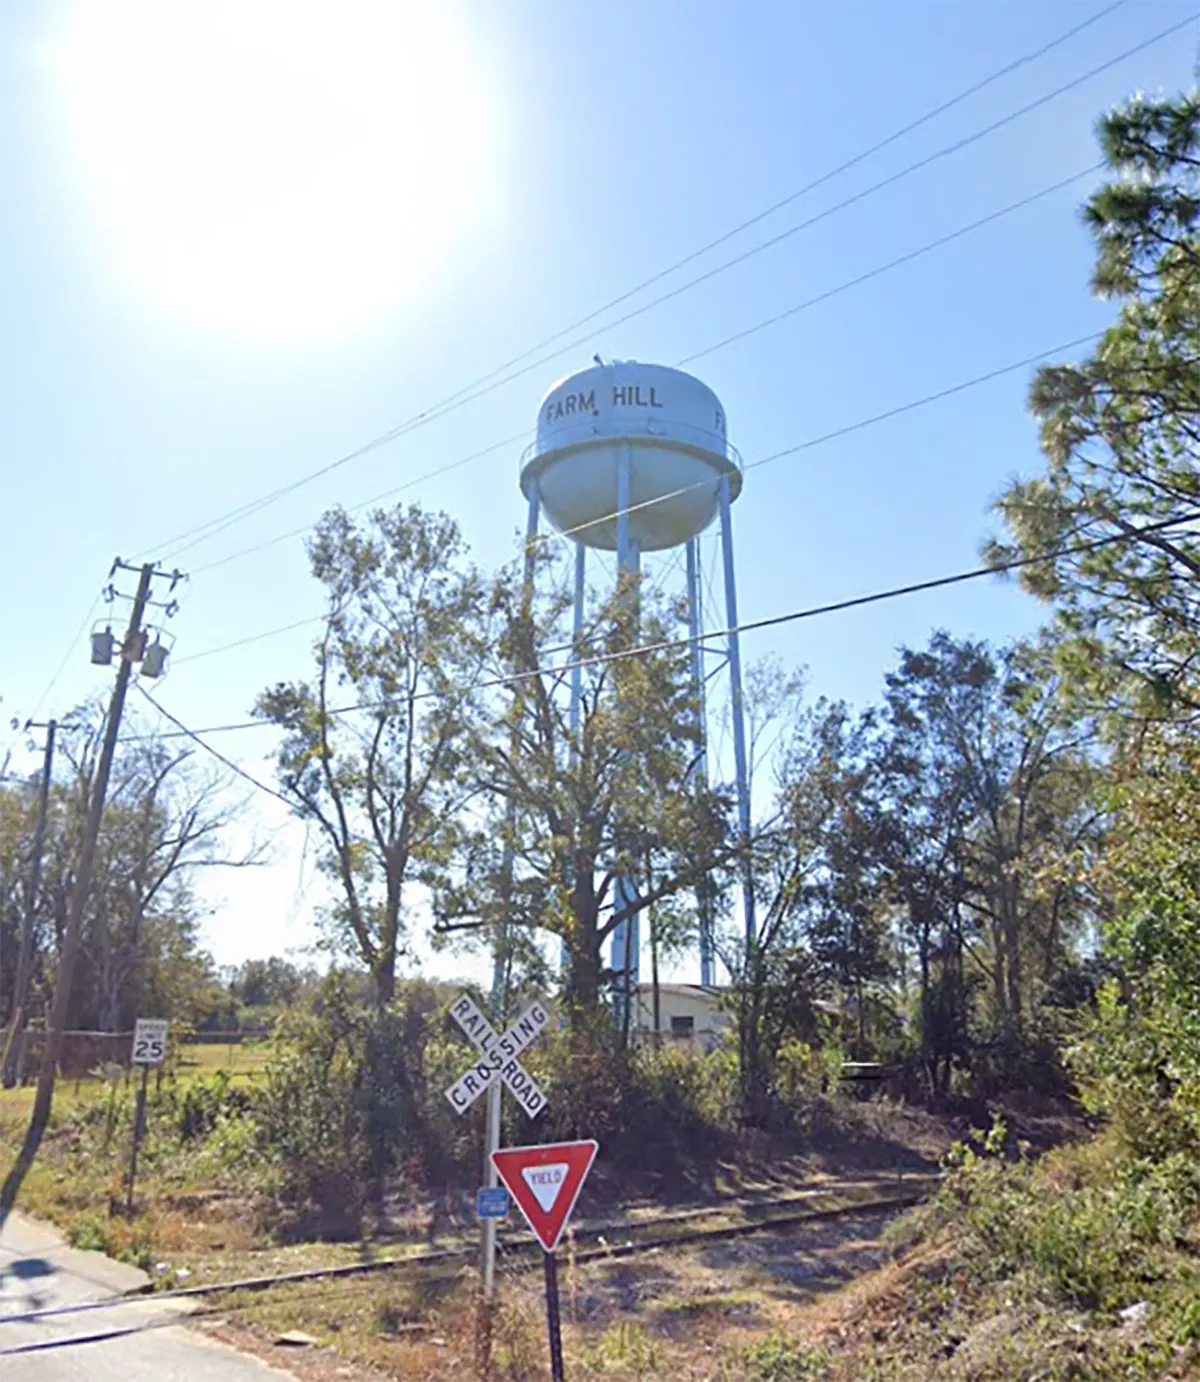 Water Tower | Air Conditioning Repair in Cantonment | Emerald Coast Air Conditioning and Heating | AirConditioningRepairPensacola.com